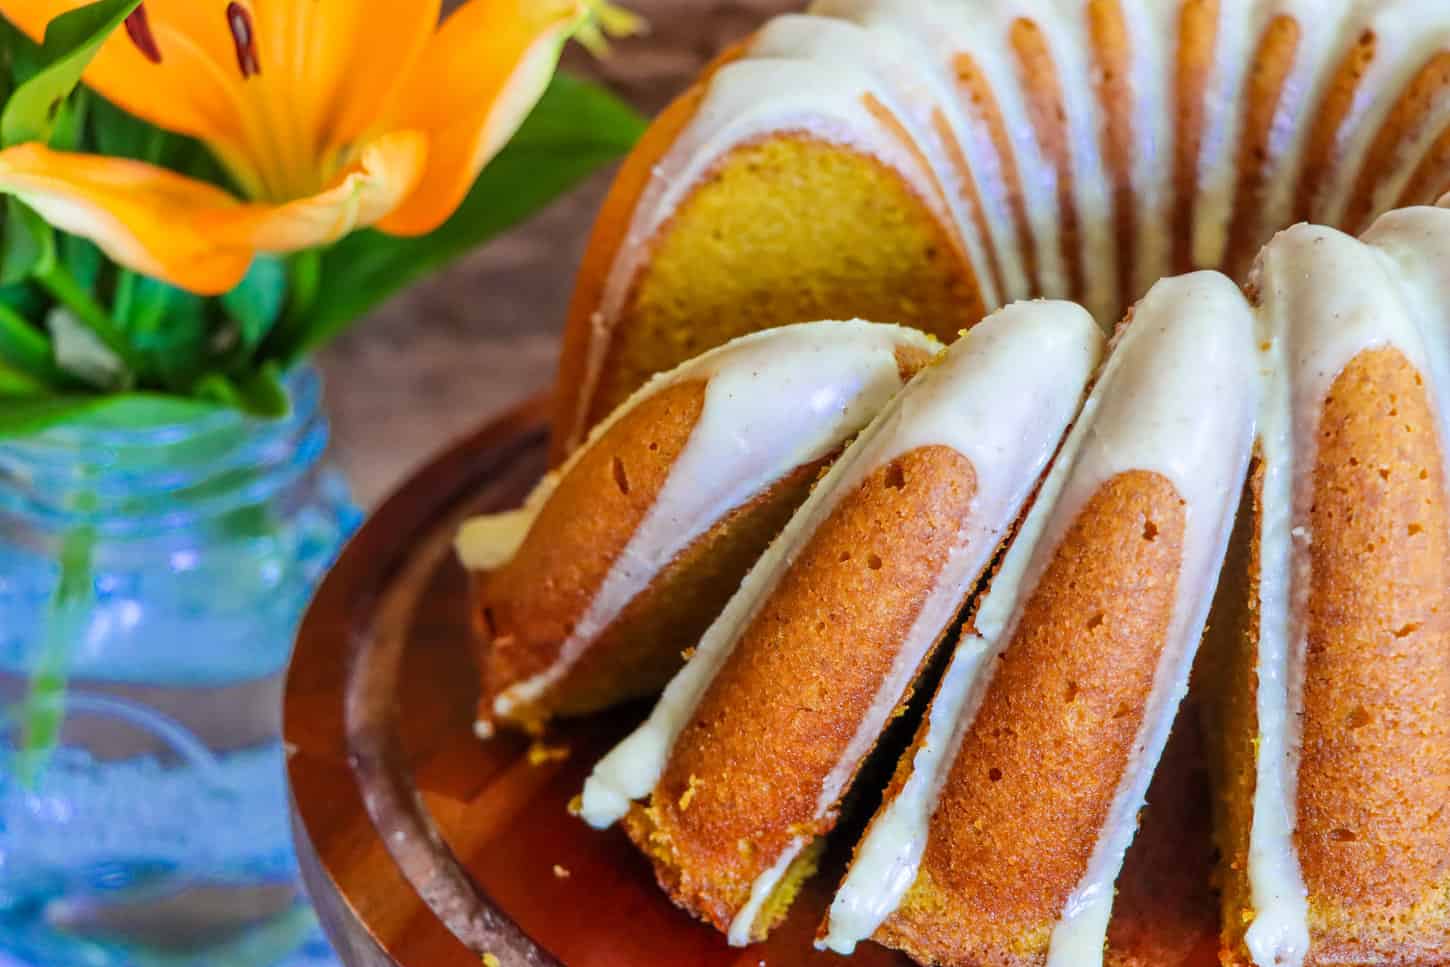 Pumpkin Spice Bundt Cake (Made With a Cake Mix) - Together as Family